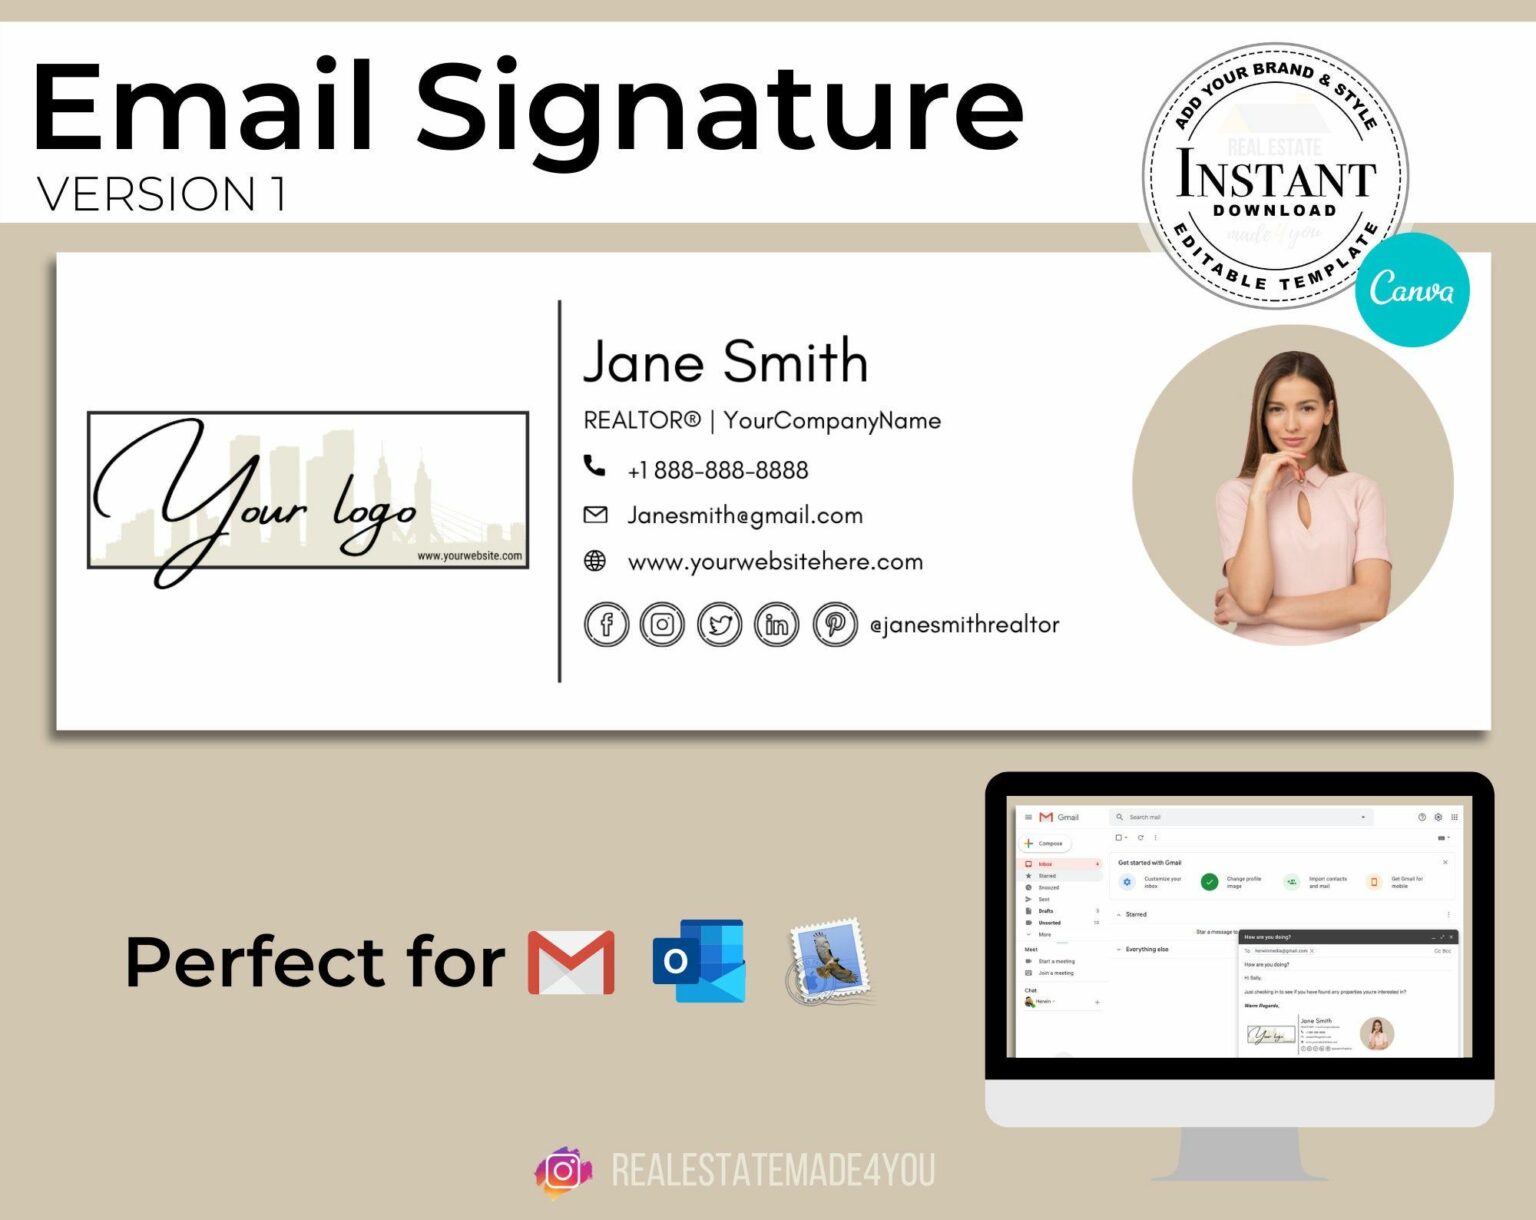 How to add logo to email signature in outlook - heartpoi